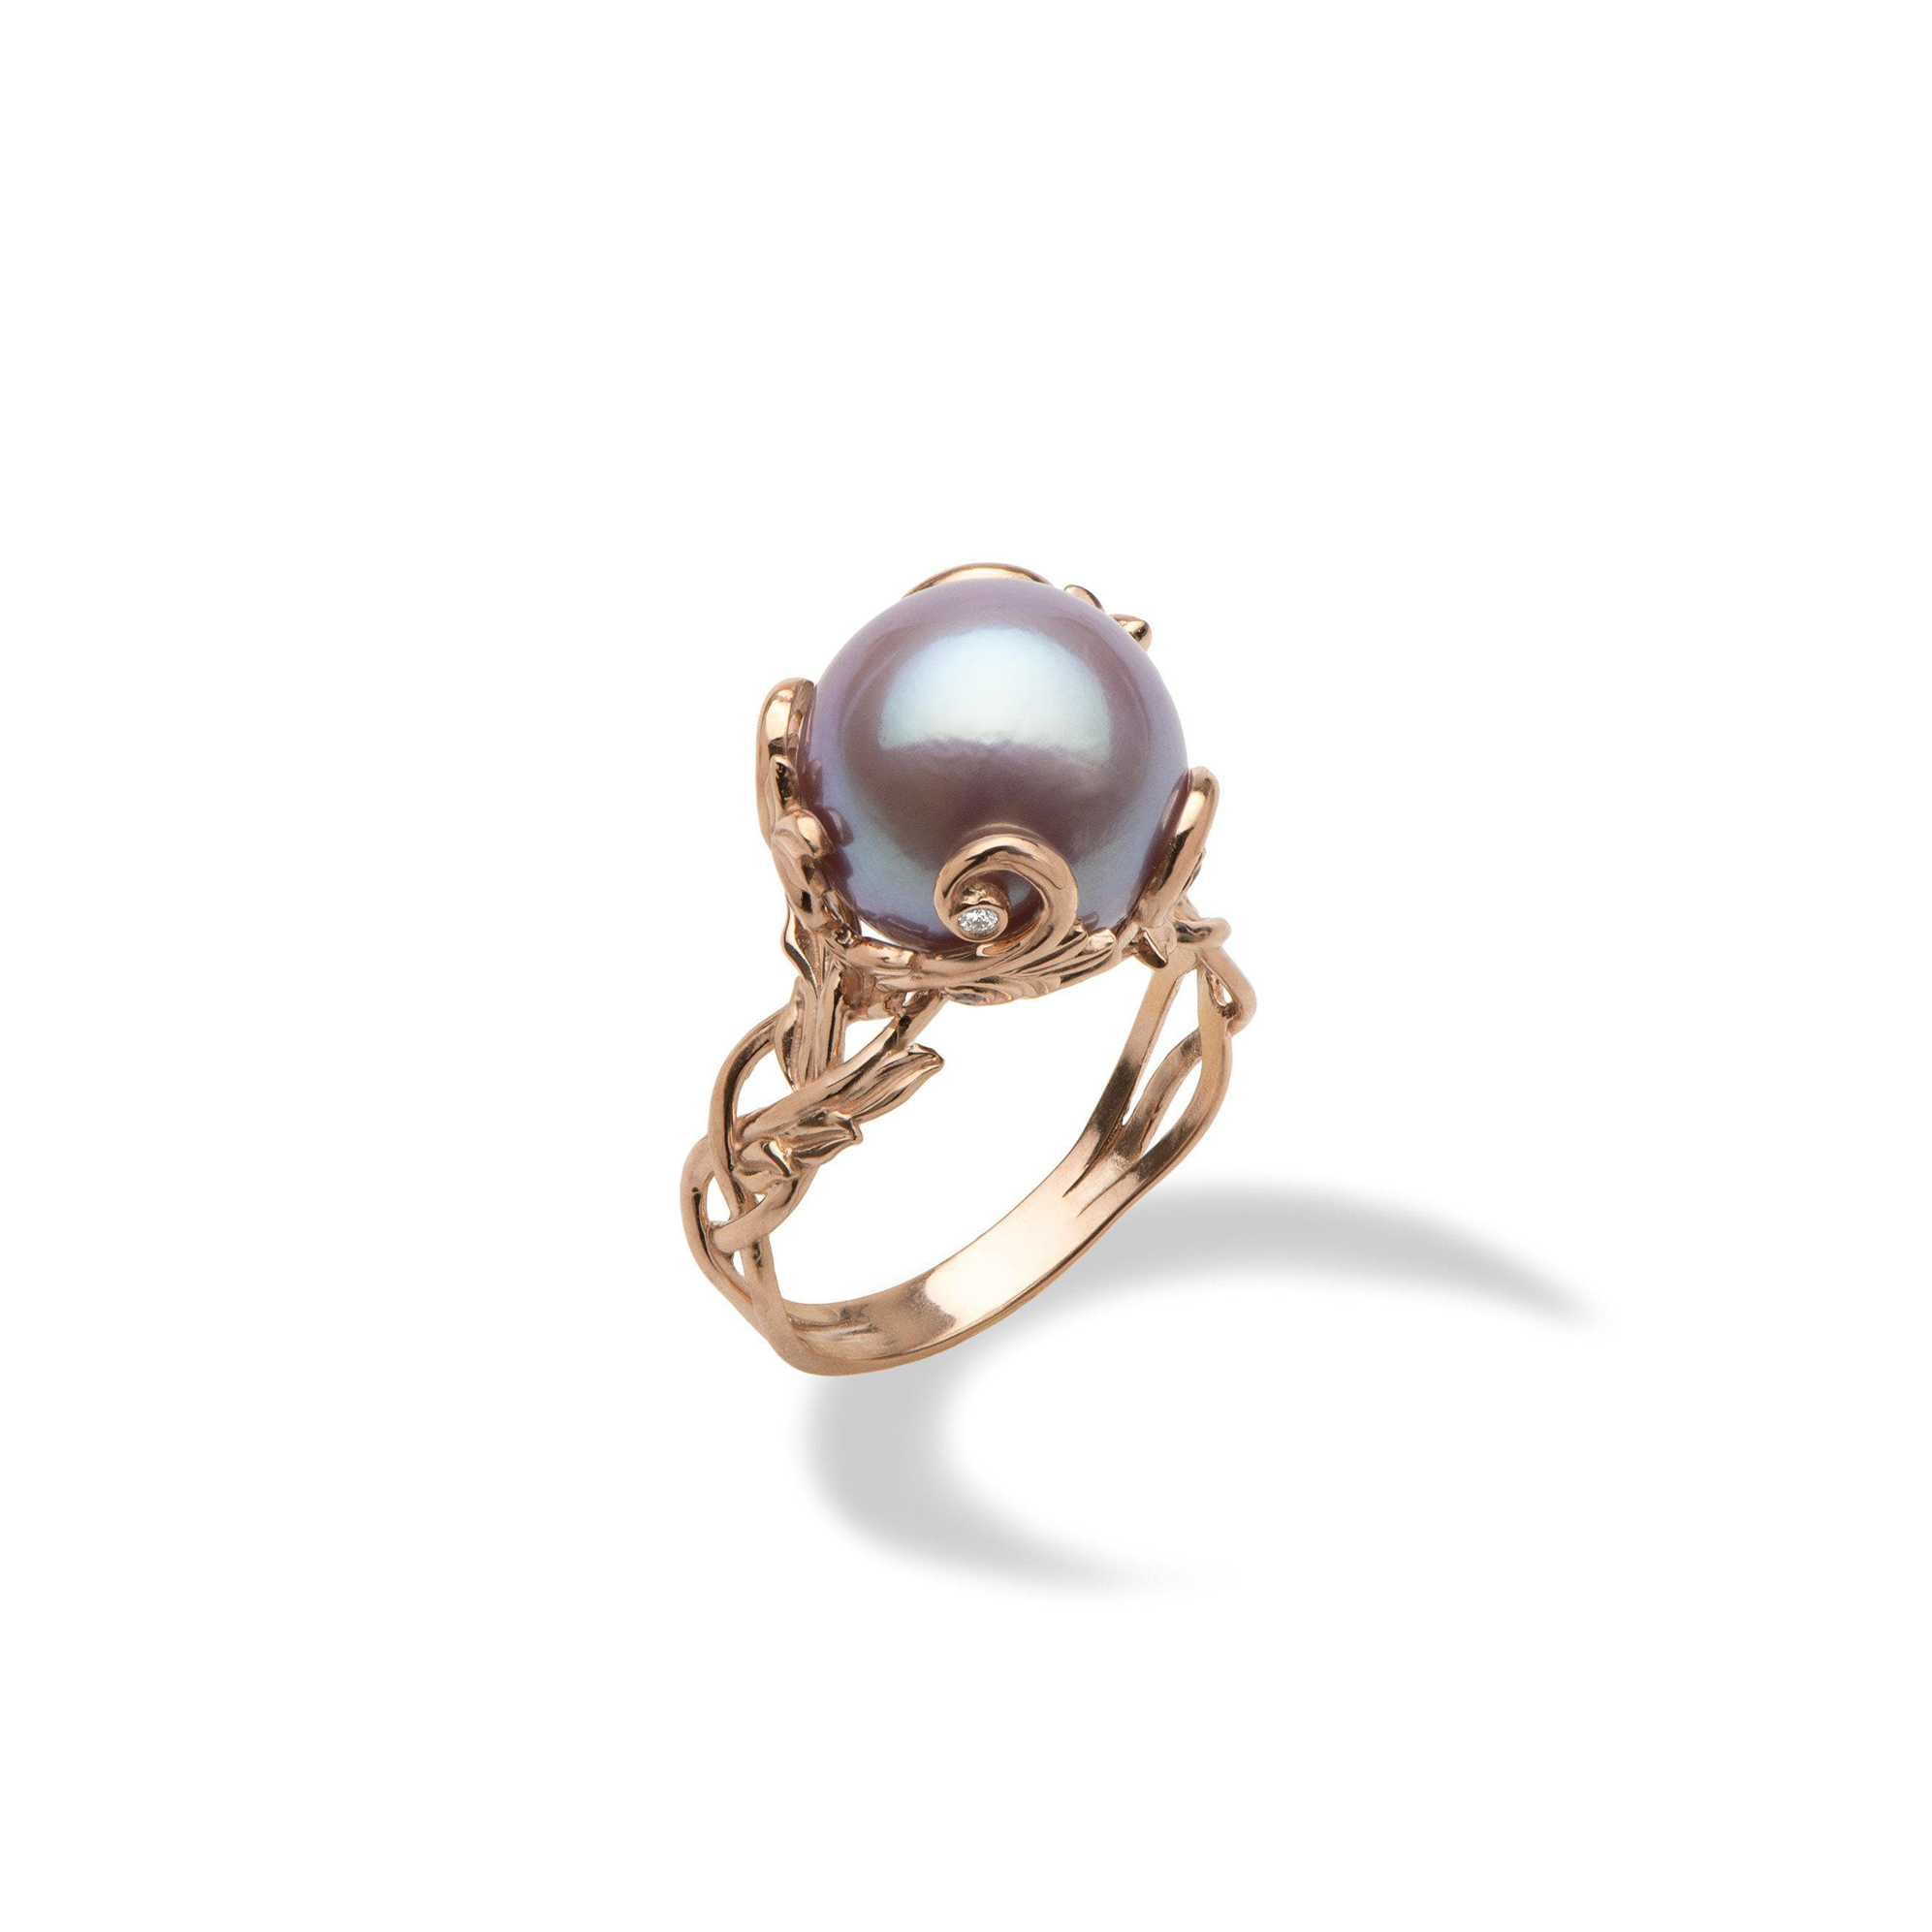 Living Heirloom Lilac Freshwater Pearl Ring in Rose Gold with Diamonds - 11-12mm